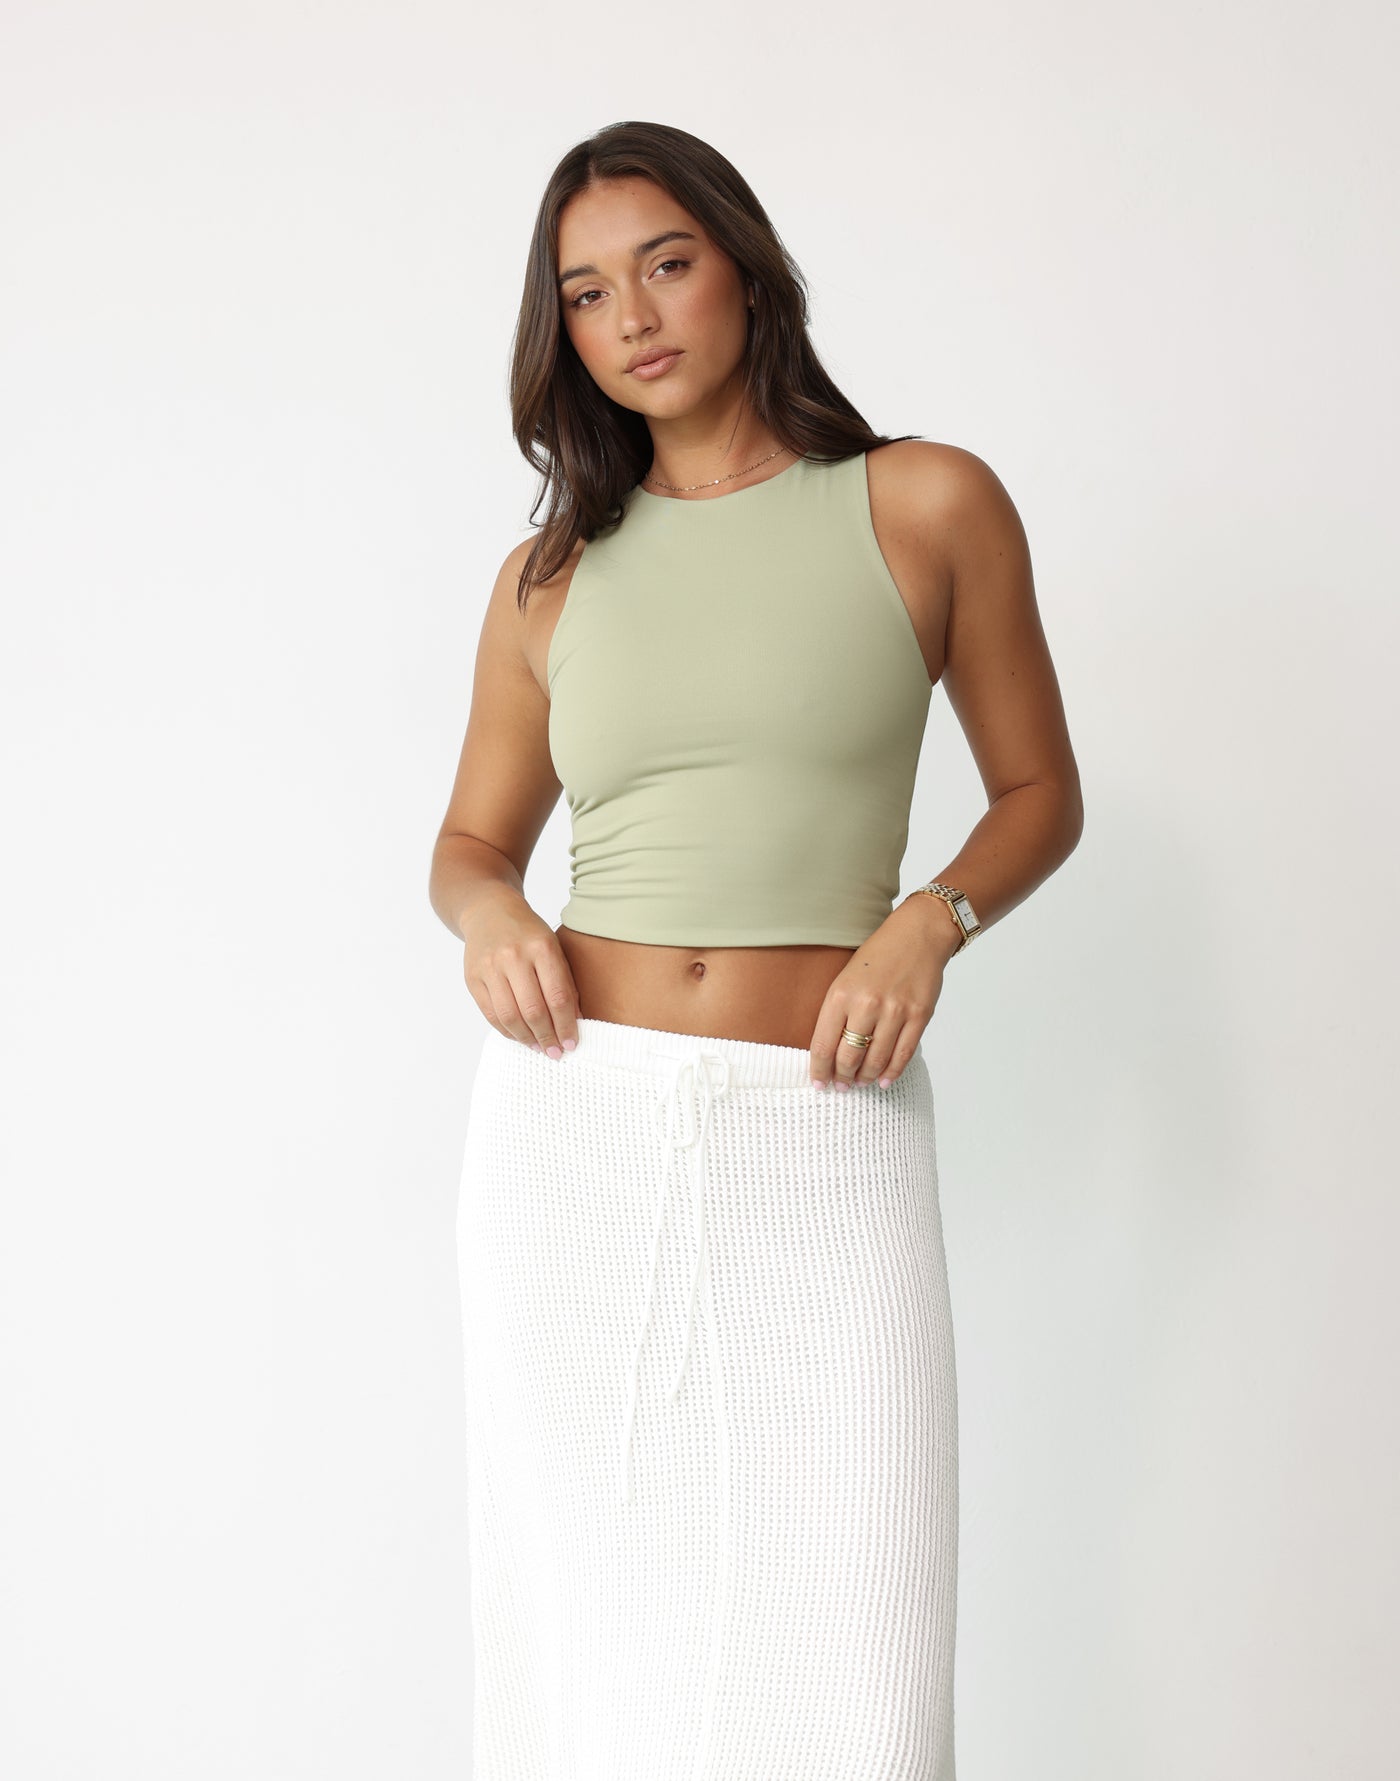 Alainn Top (Sage) - Bodycon Double Lined Crop Top - Women's Top - Charcoal Clothing